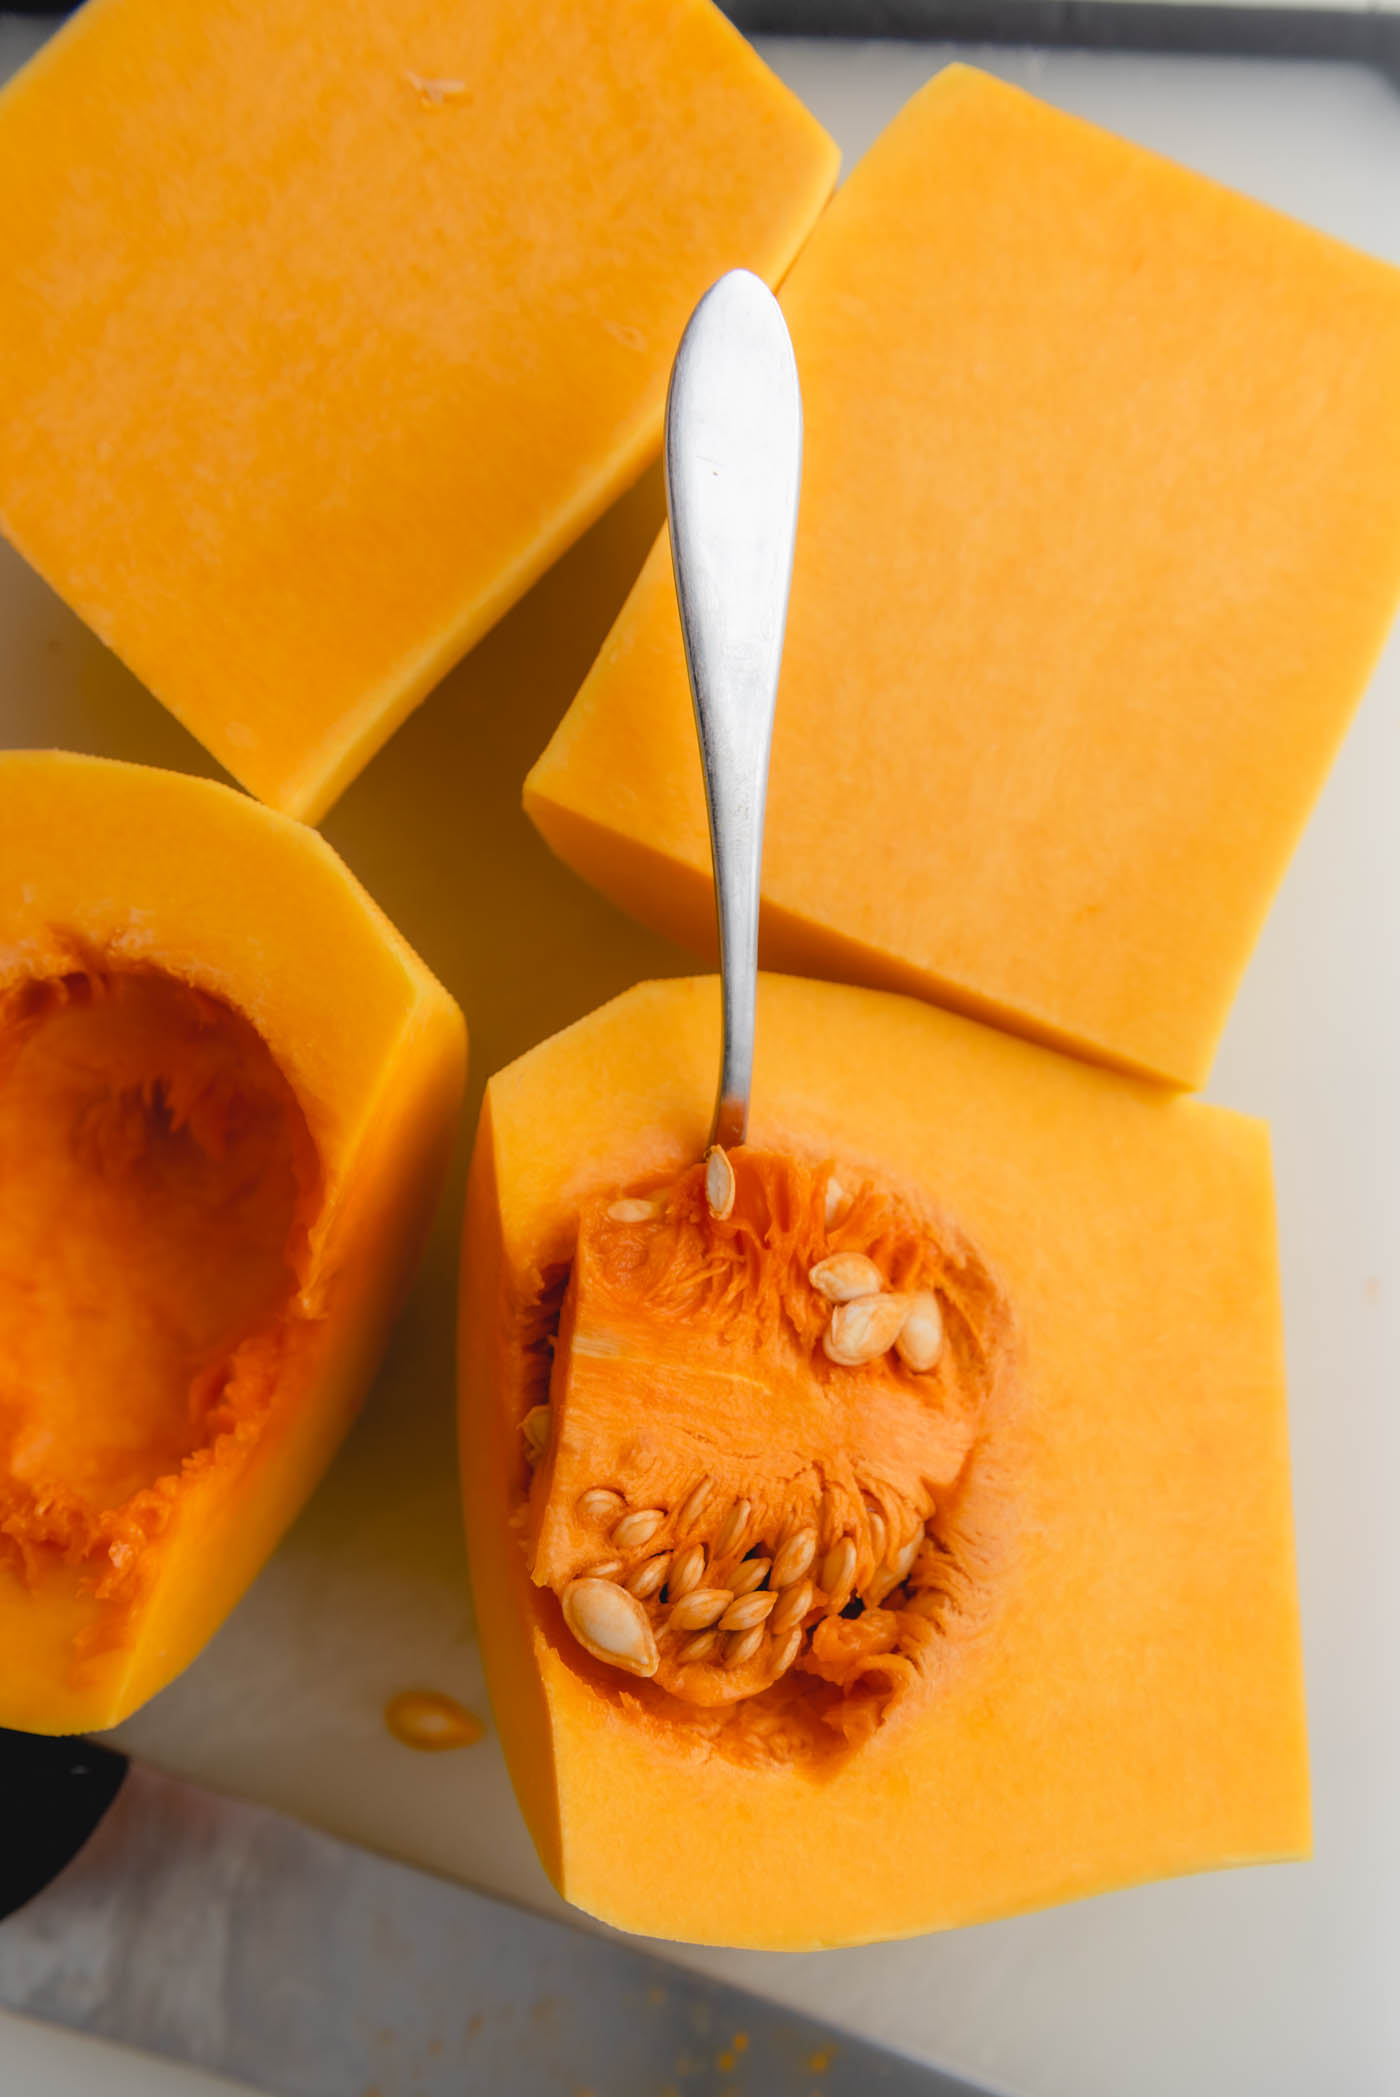 A spoon scooping the seeds out of a peeled butternut squash half.